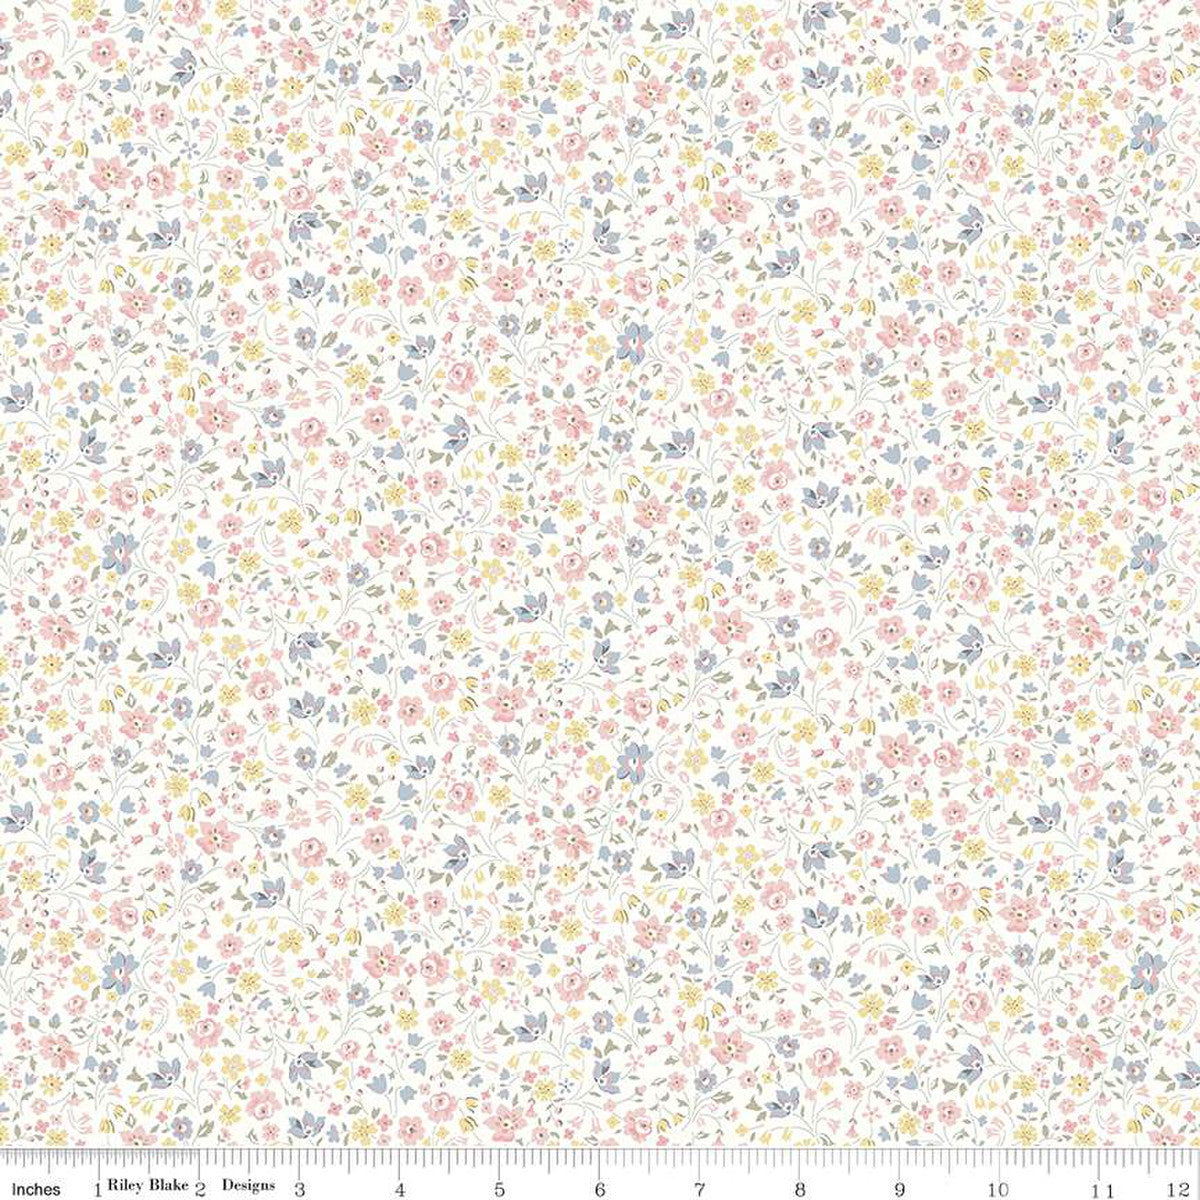 Liberty Flower Show Pebble Forget Me Not Blossom A Yardage